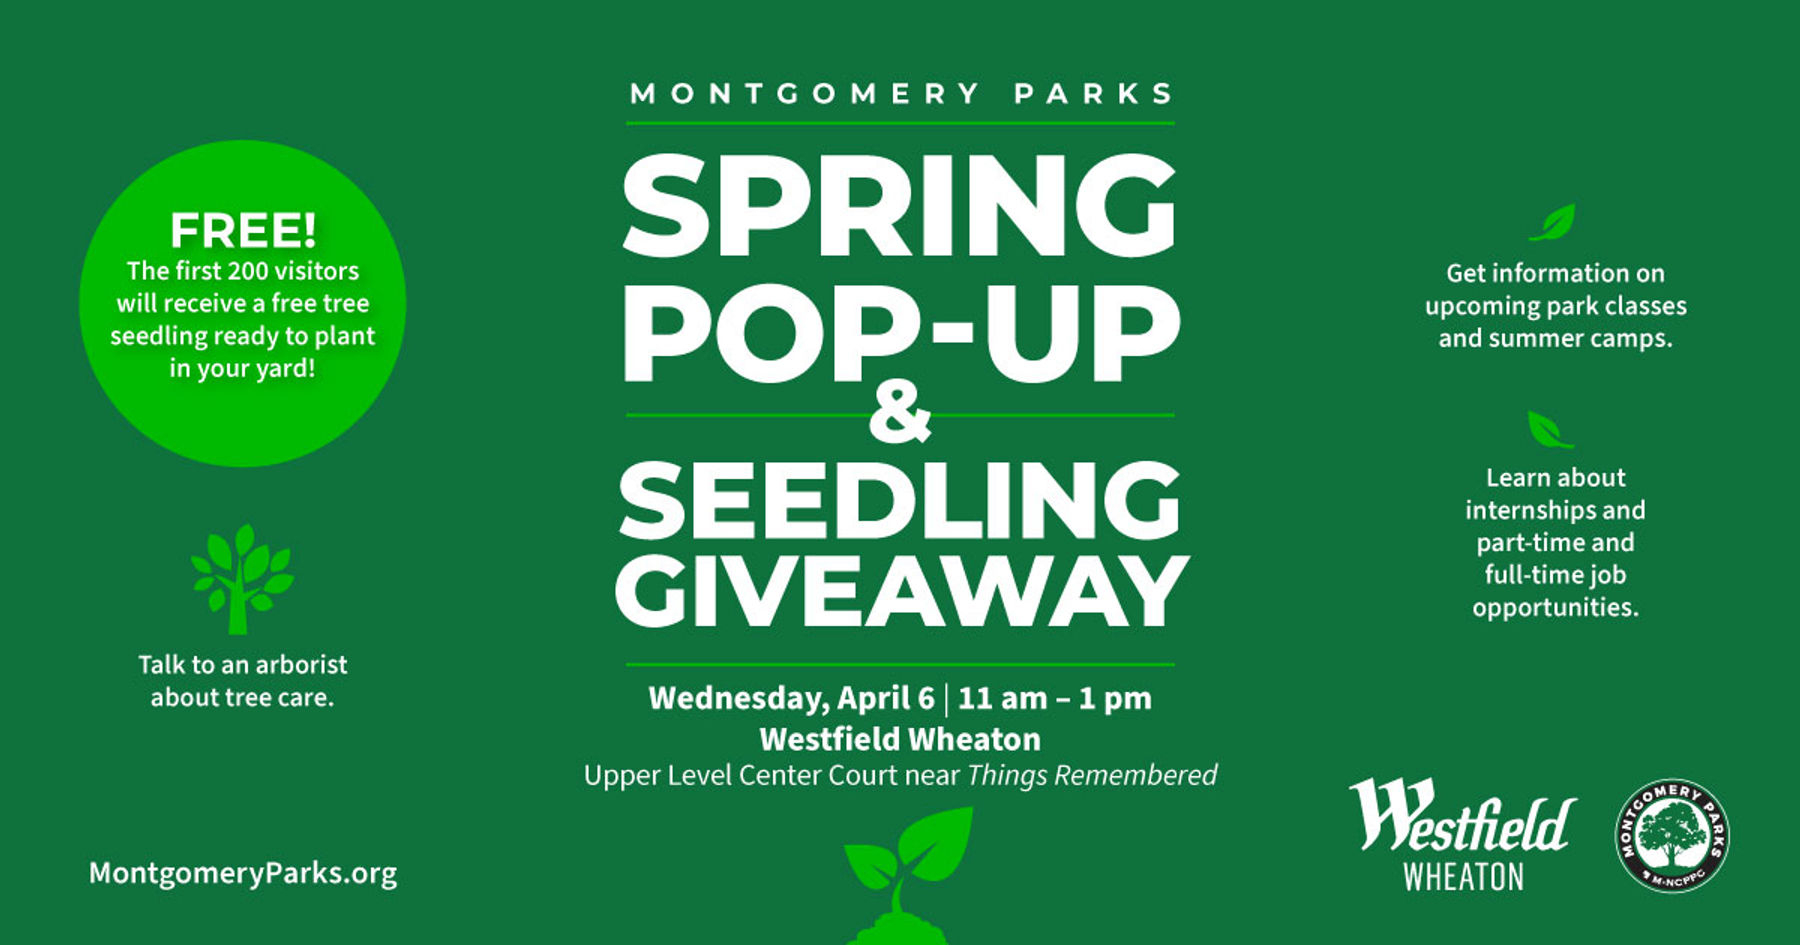 Montgomery Parks Spring Pop Up Seedling Giveaway at Westfield Wheaton